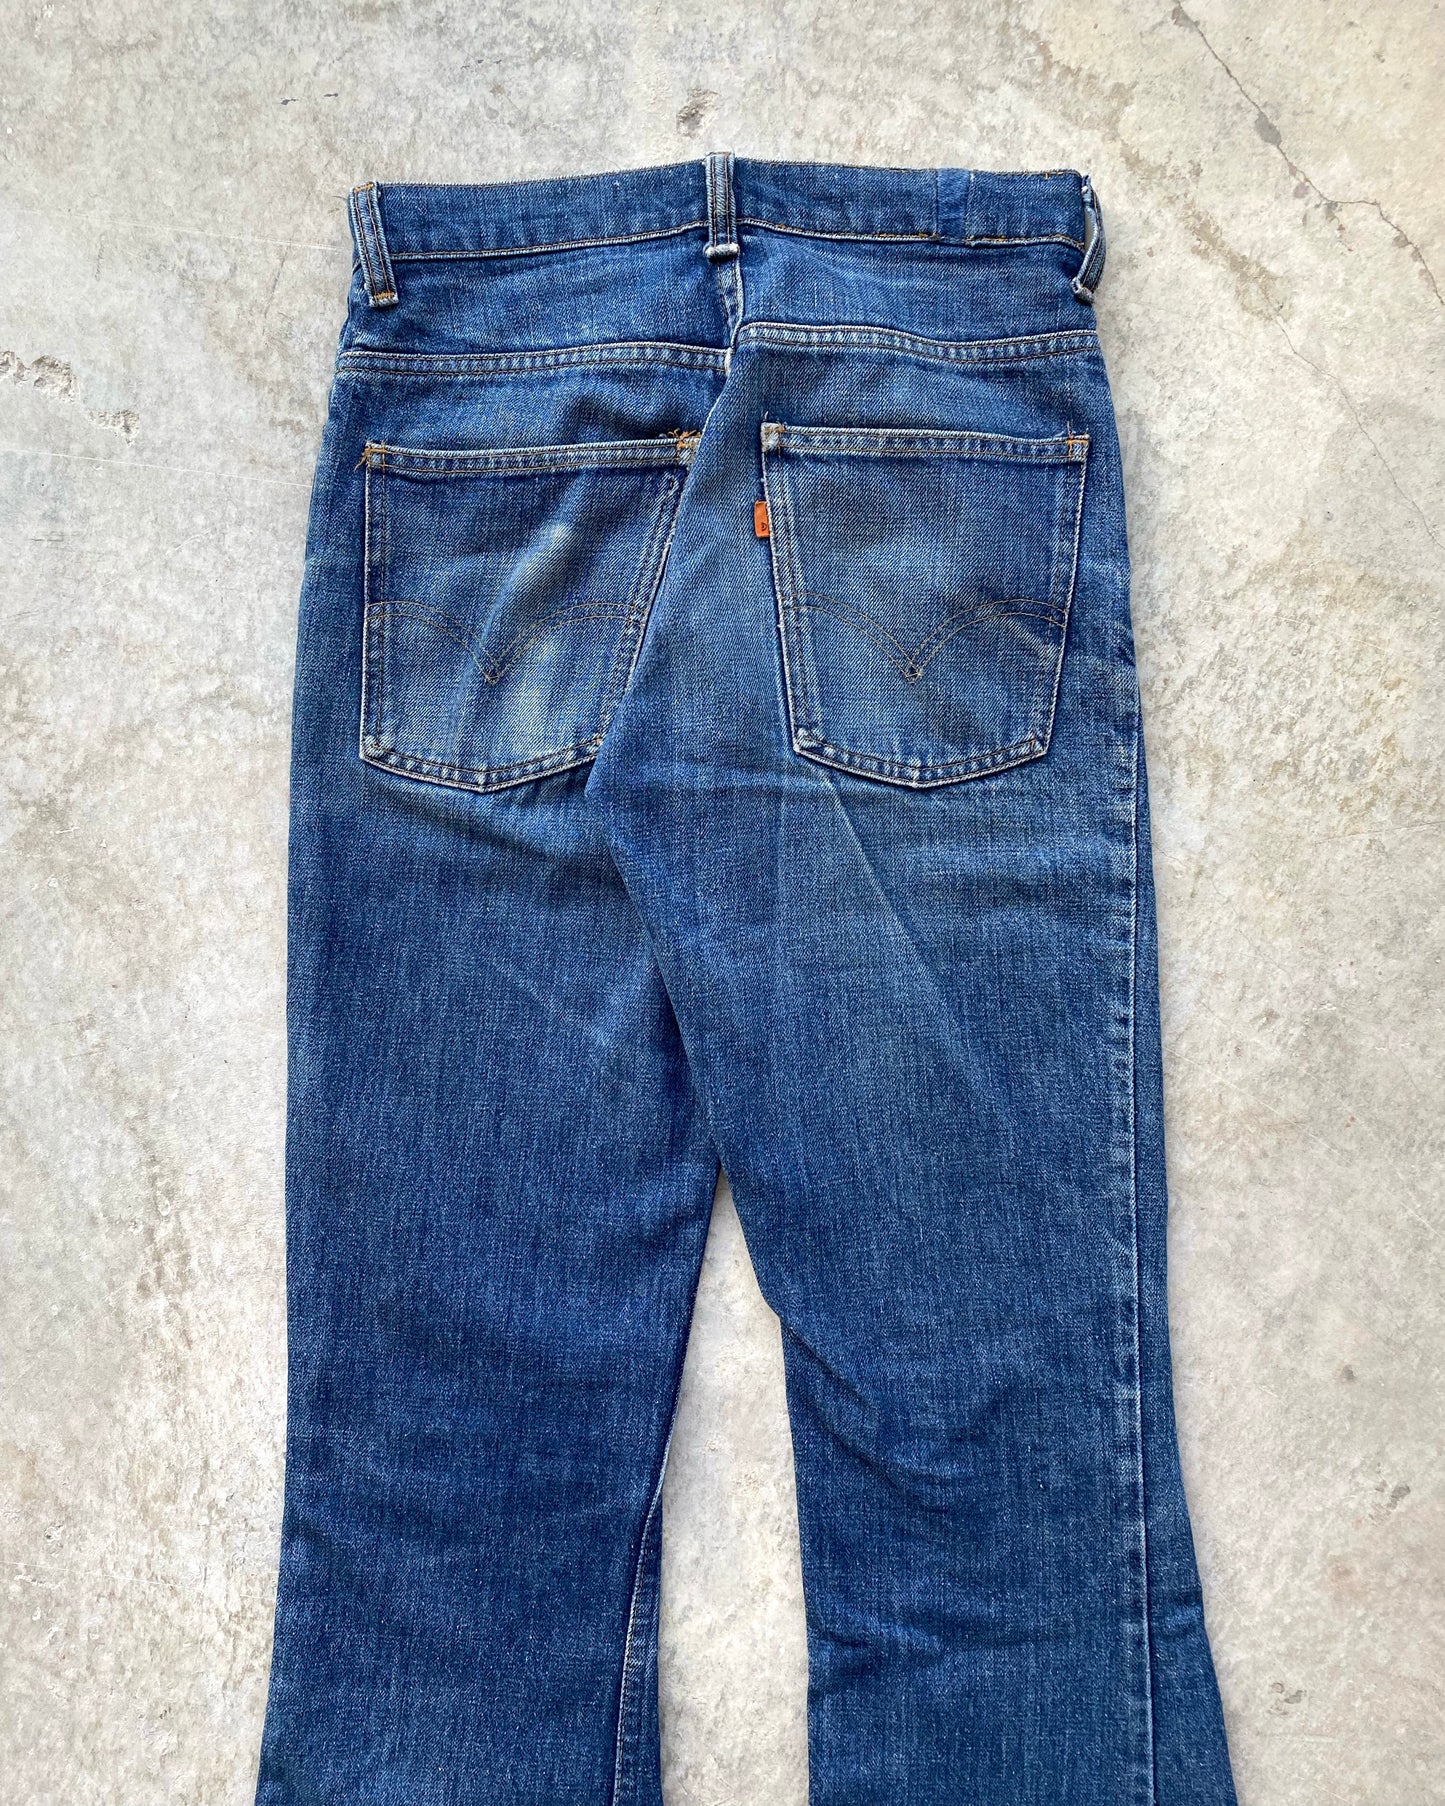 1970S MEDIUM WASHED LEVI'S 646 BOOTCUT JEANS (29X30)